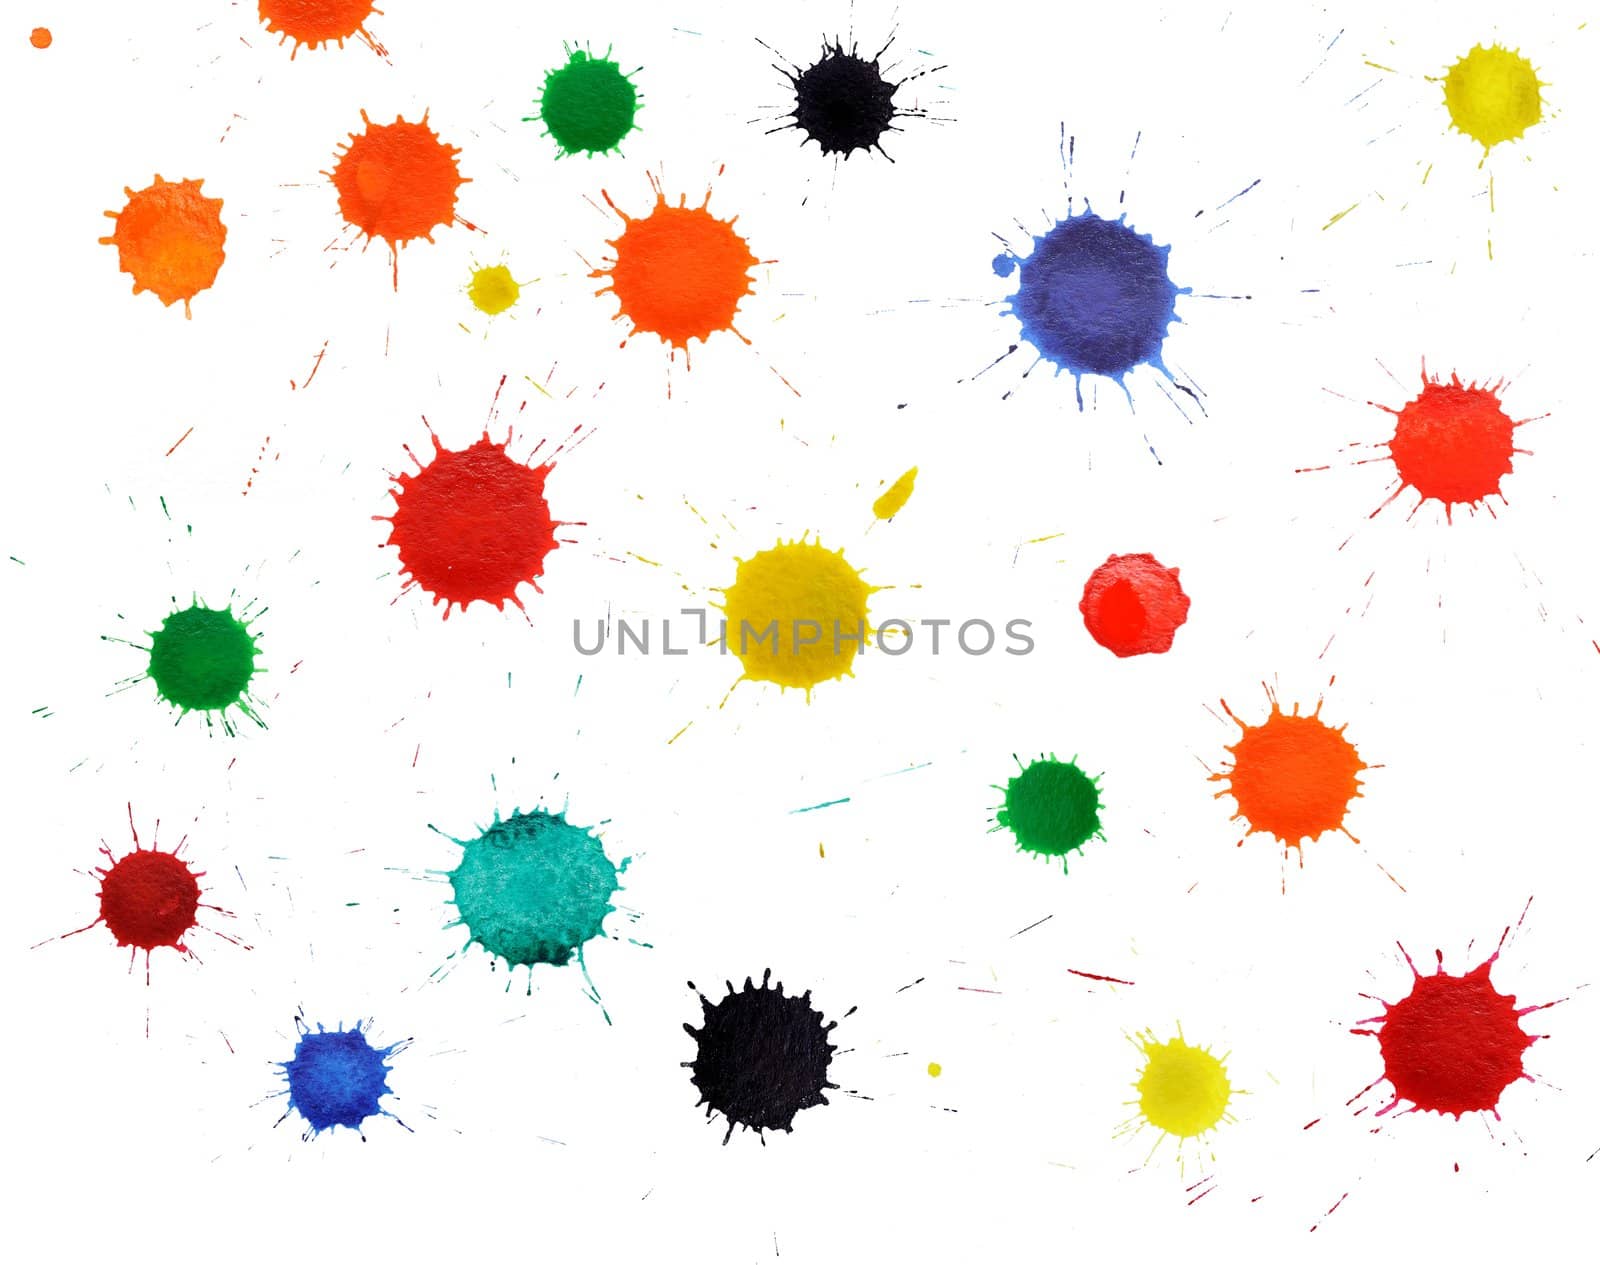 An image of various splashes on white background